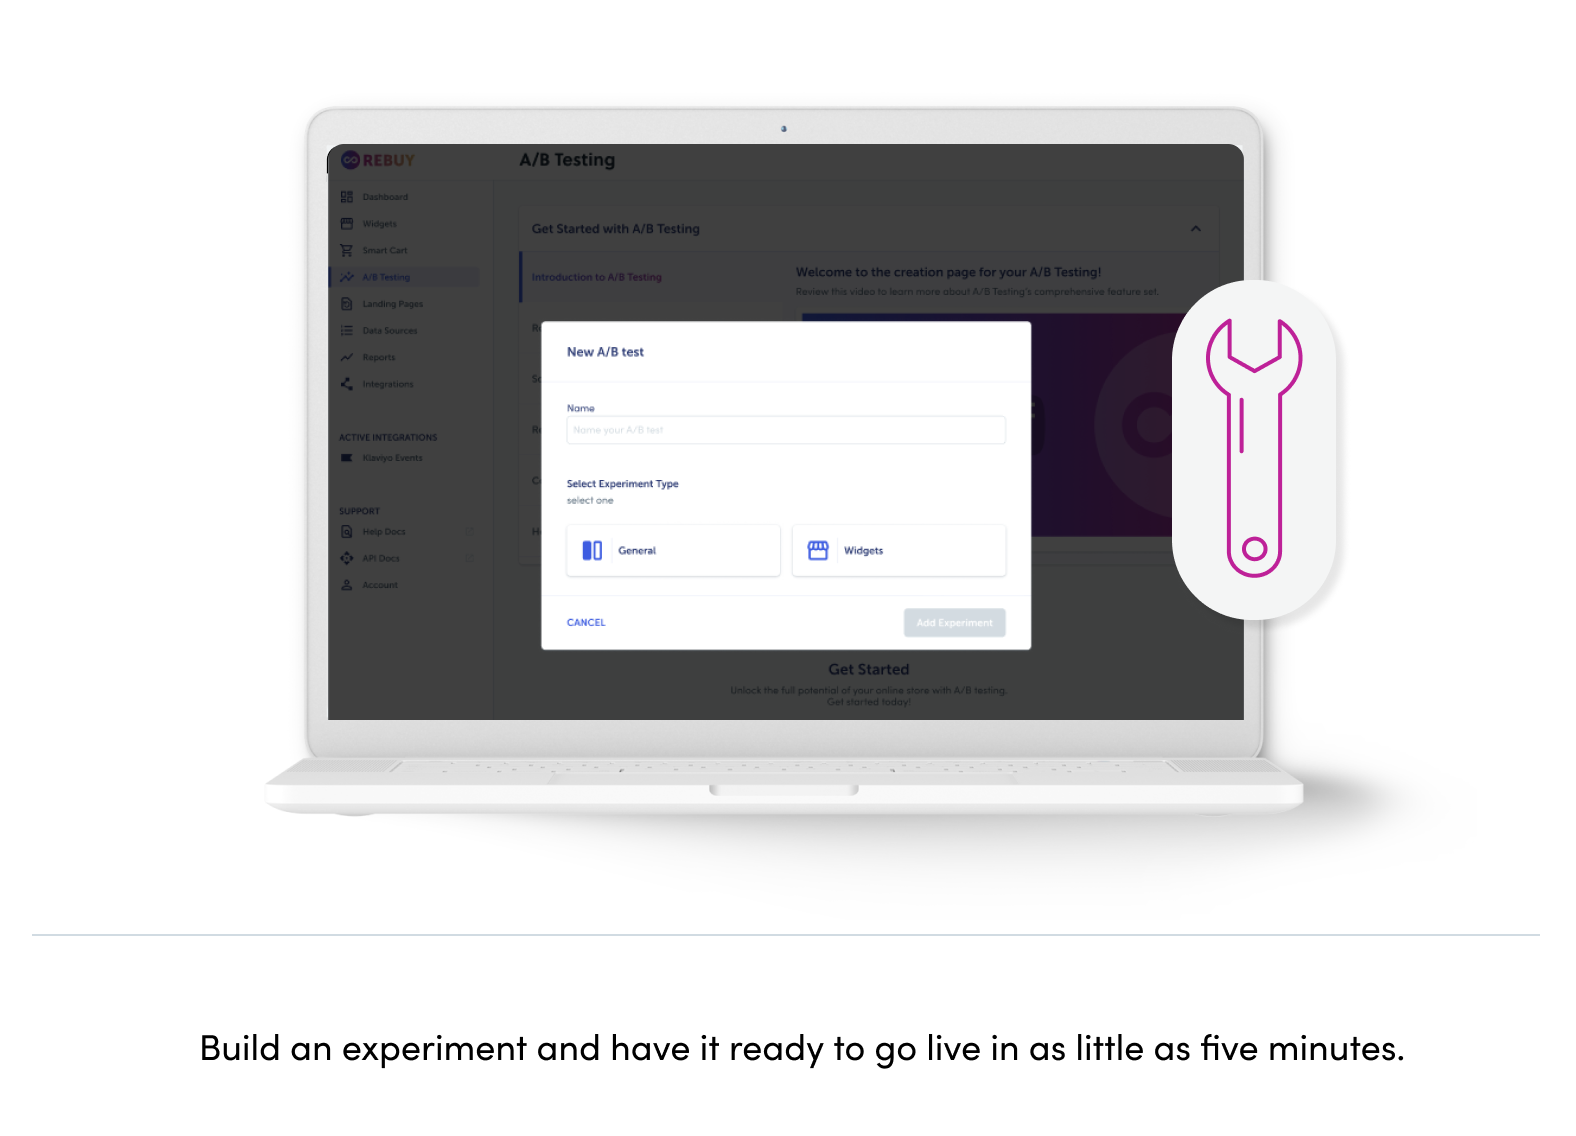 Build an experiment and have it ready to go live in as little as five minutes.